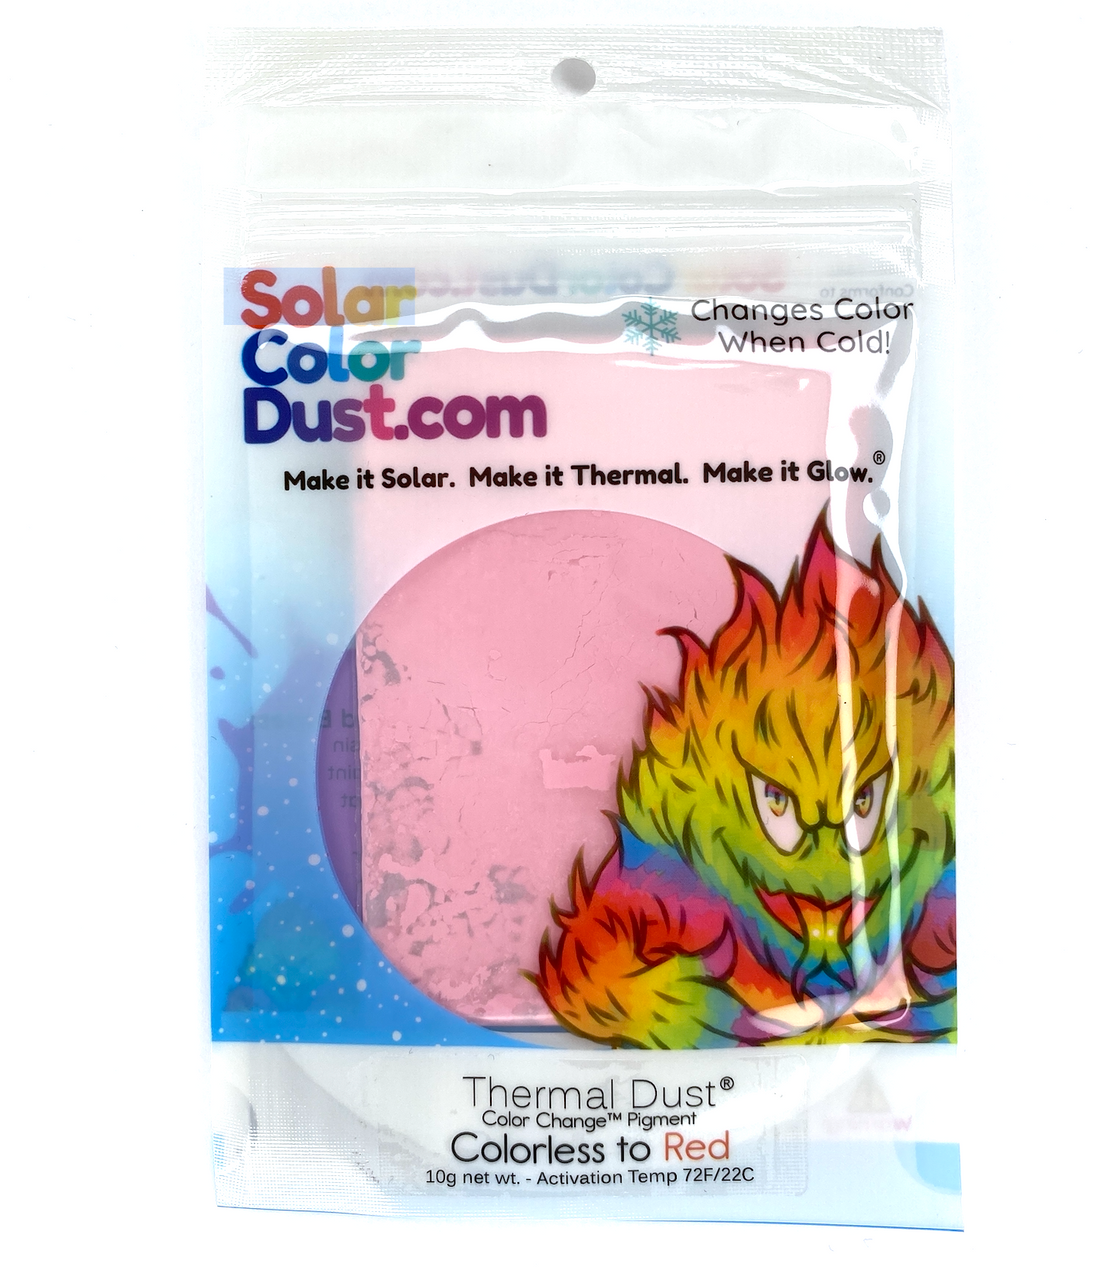 Thermochromic Pigment Powder for Nail Art - China Temperature